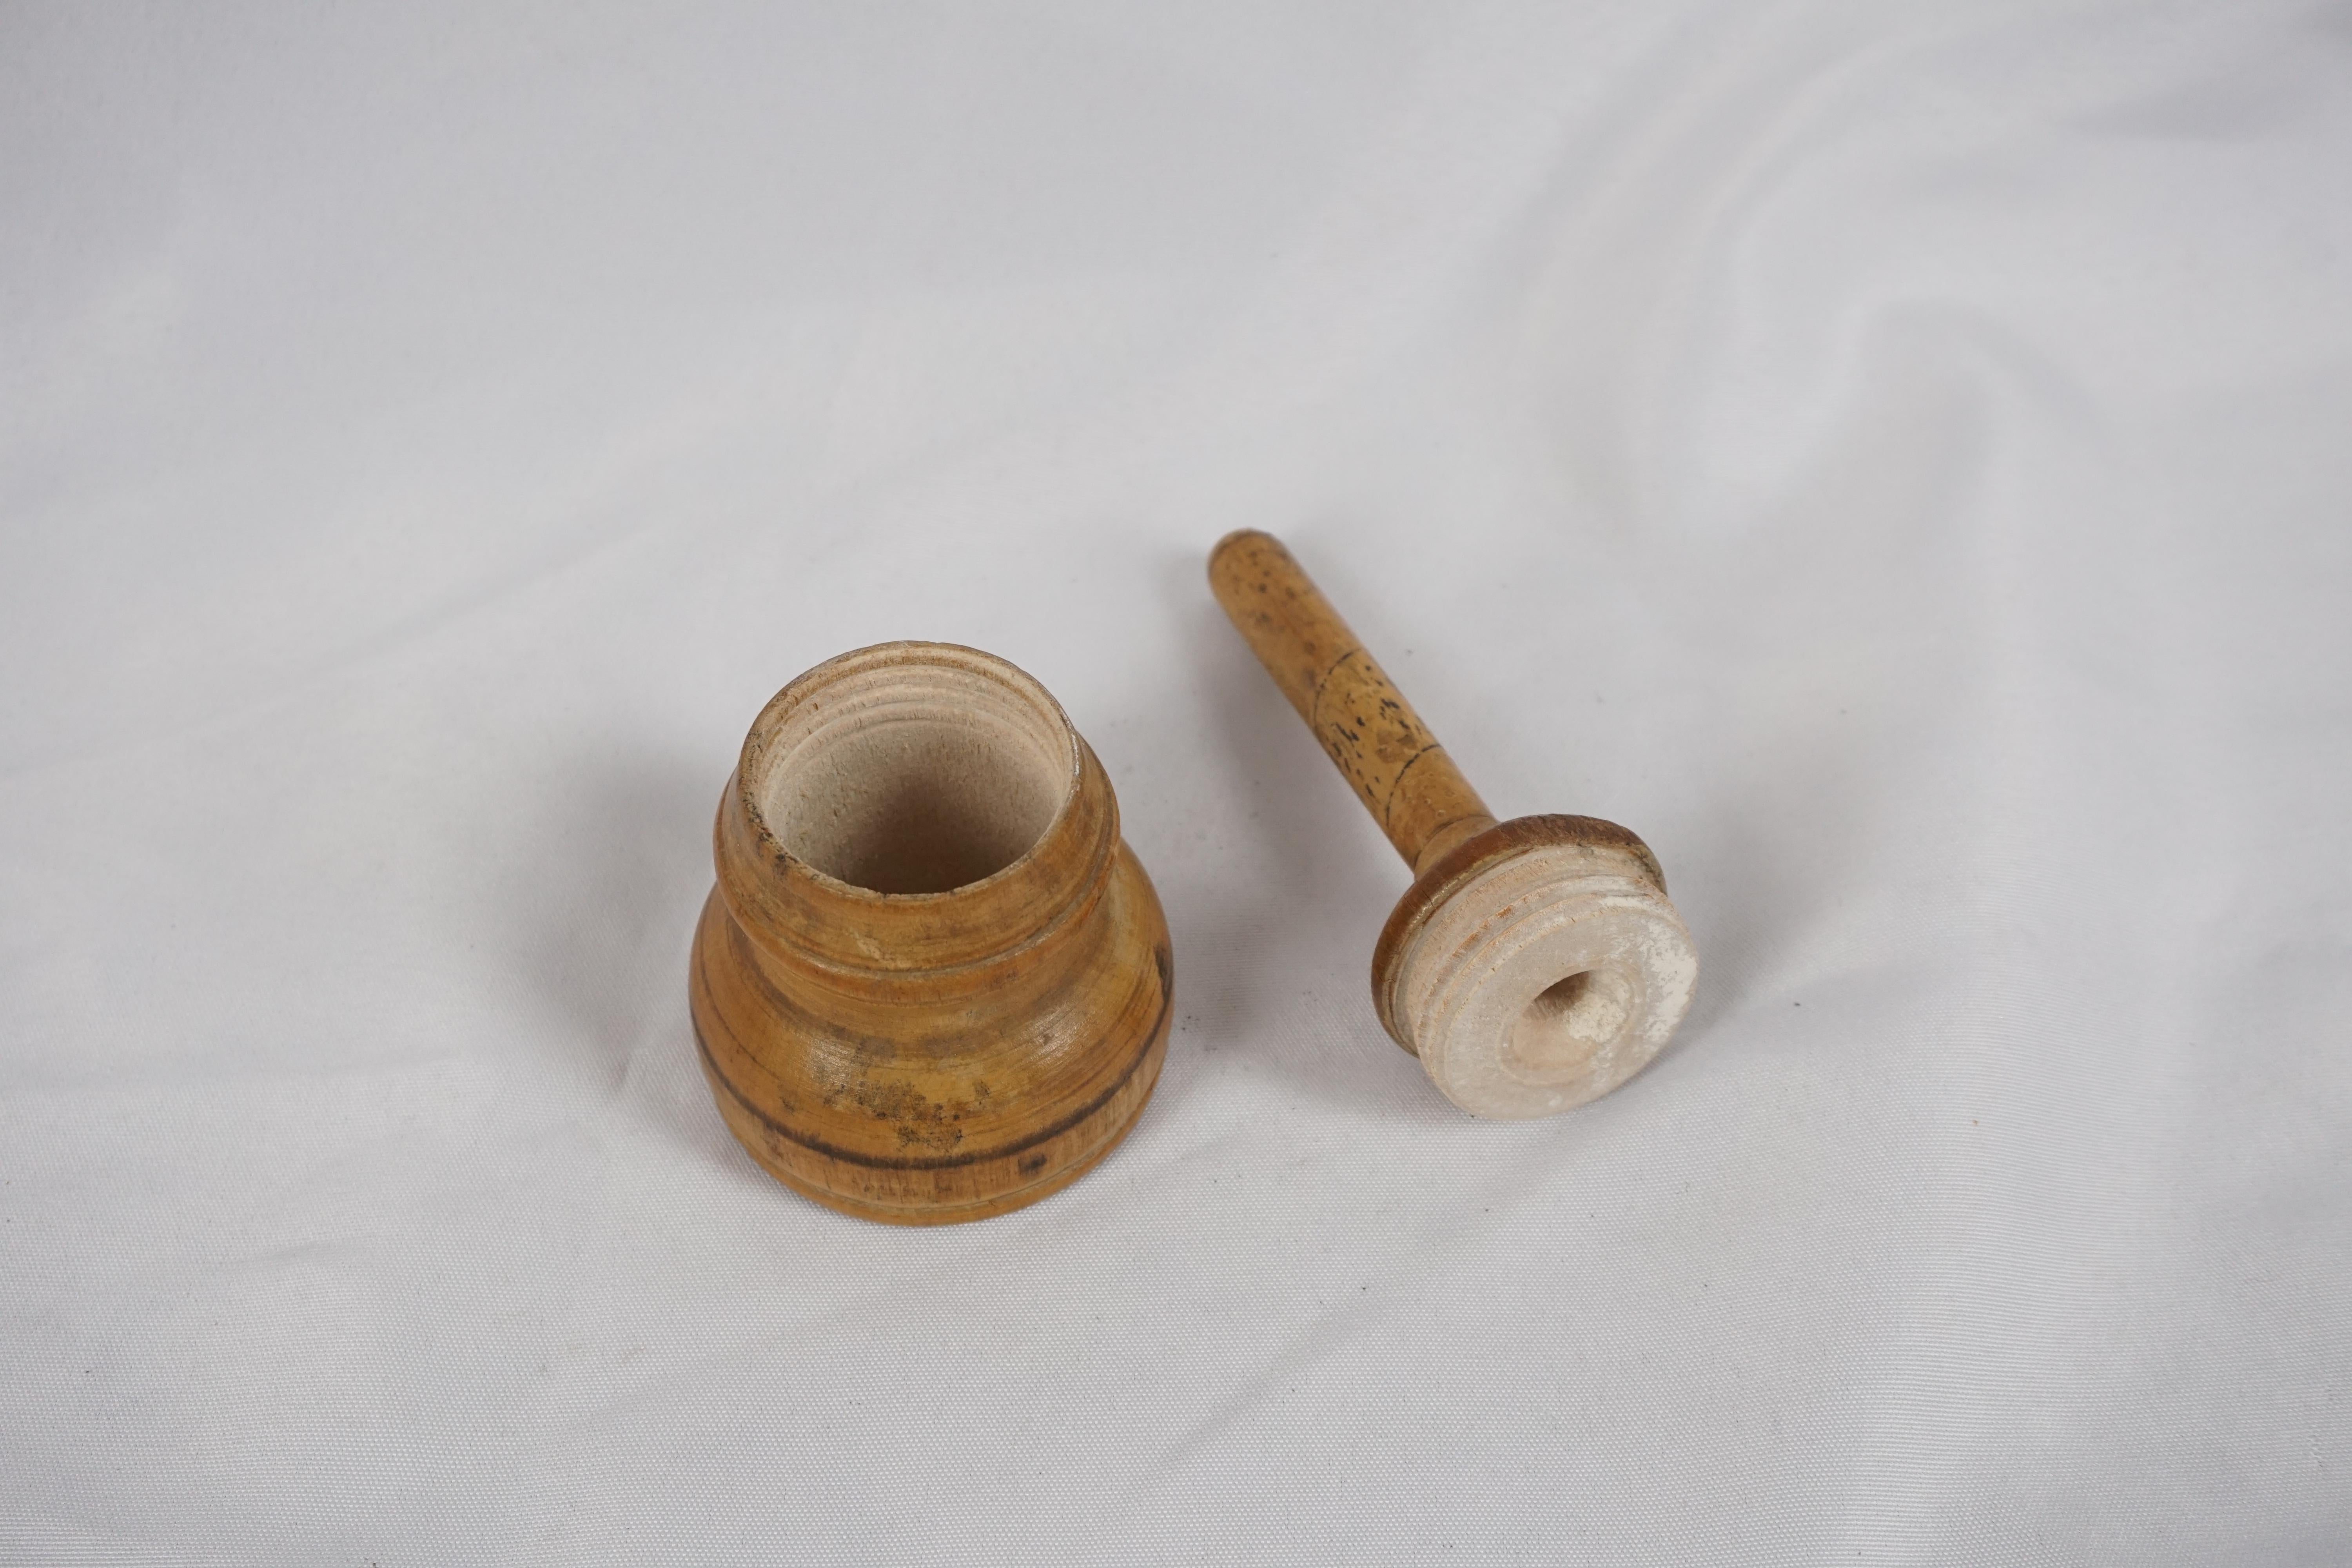 Hand-Crafted Vintage Wooden Bell, Inkwell Insert, Scandinavia 1930s, B2814